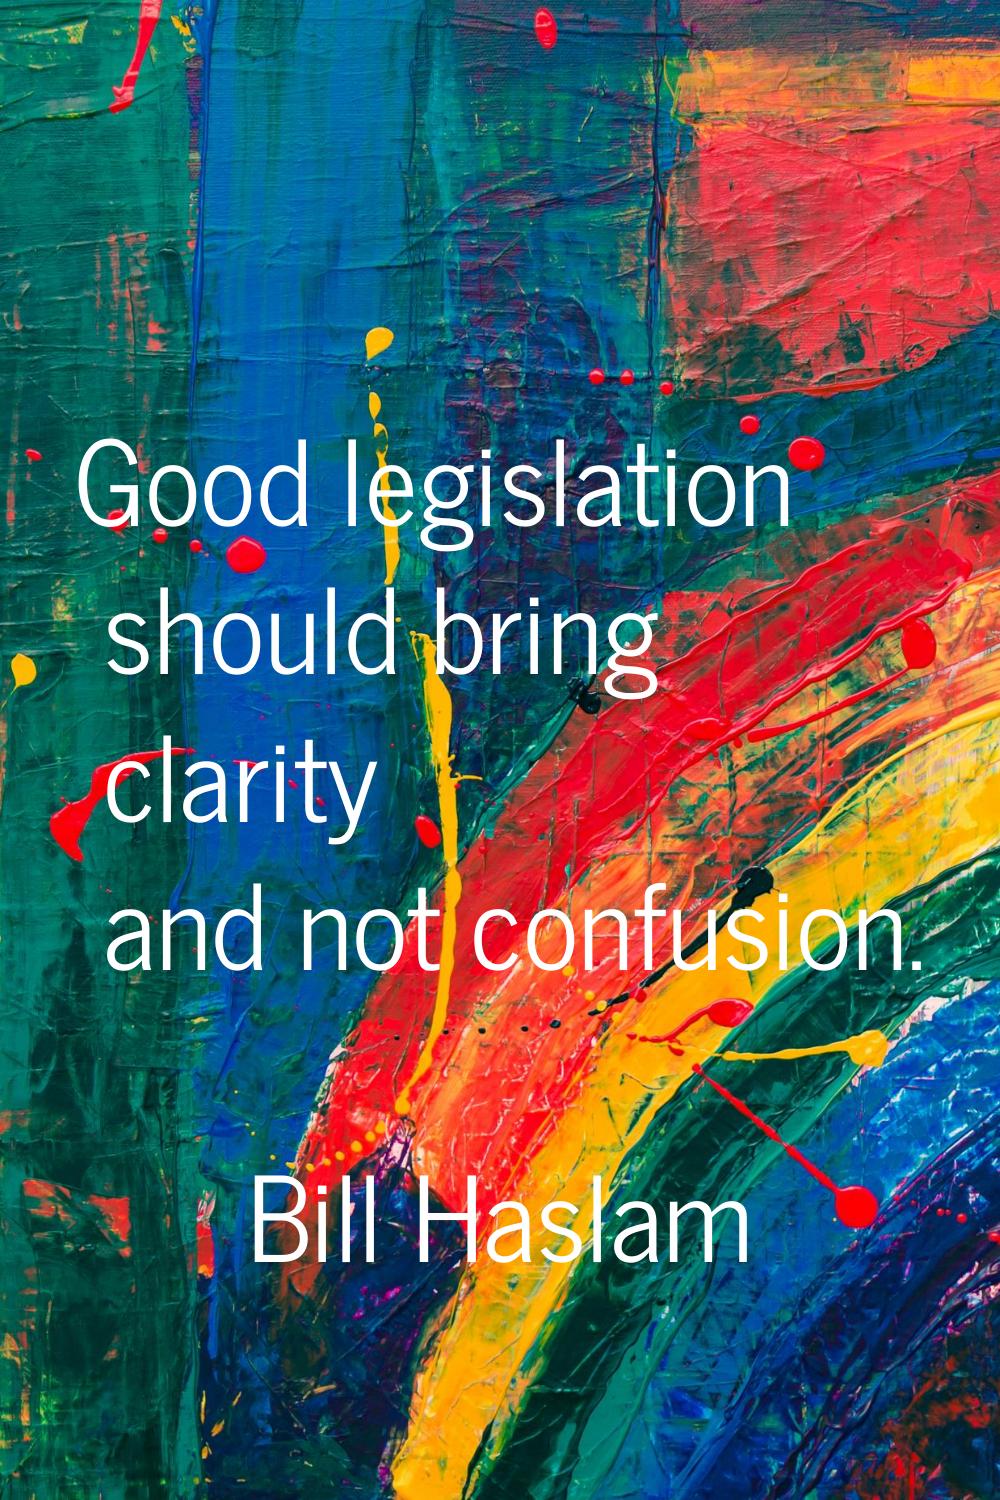 Good legislation should bring clarity and not confusion.